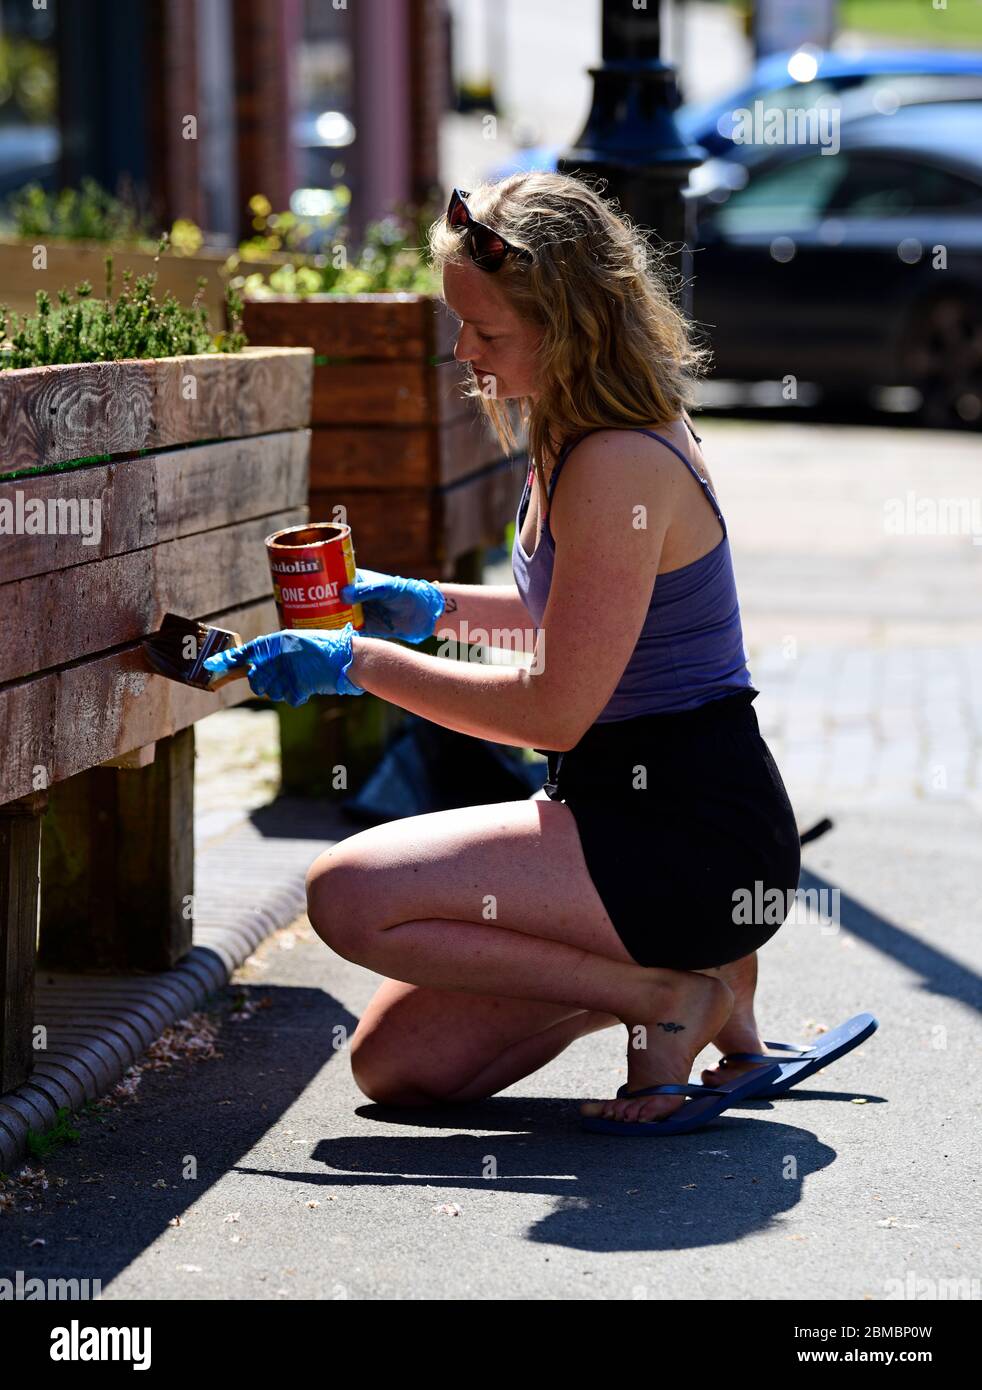 Woman painting flower bed box outside her shop during Coronavirus (COVID-19) pandemic, Haslemere, Surrey, UK. Stock Photo